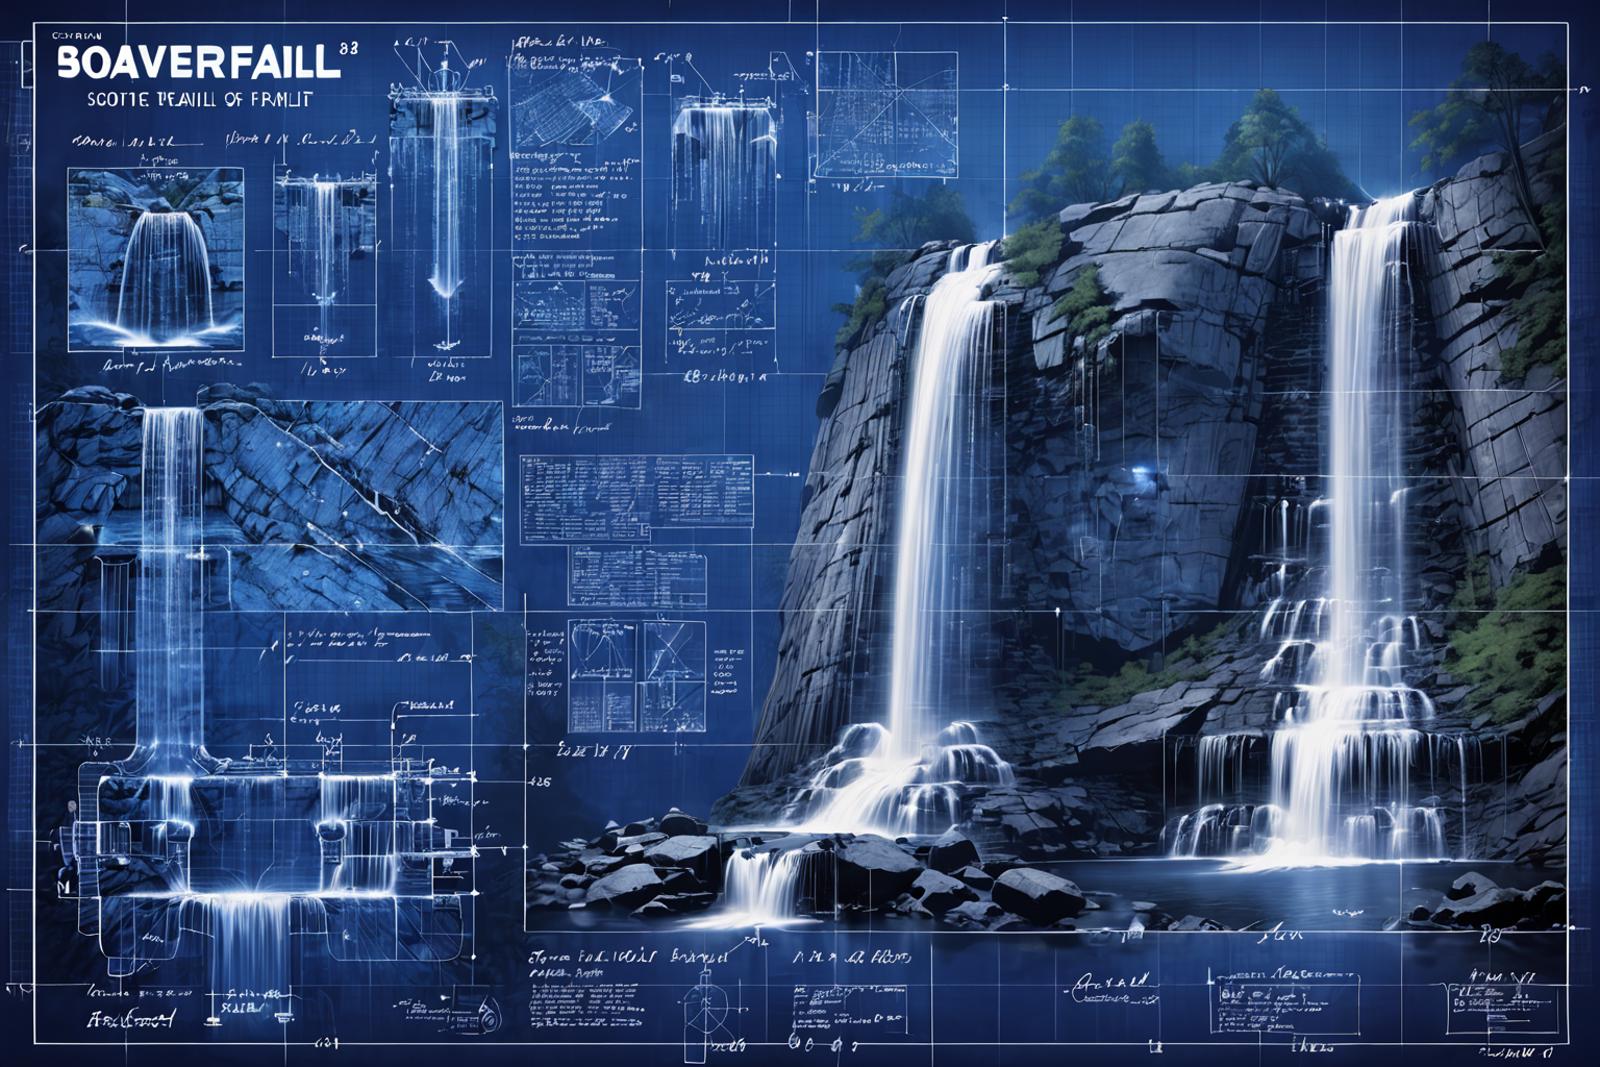 A blueprint of a waterfall and its surroundings, including a large rock wall and a blue pool.